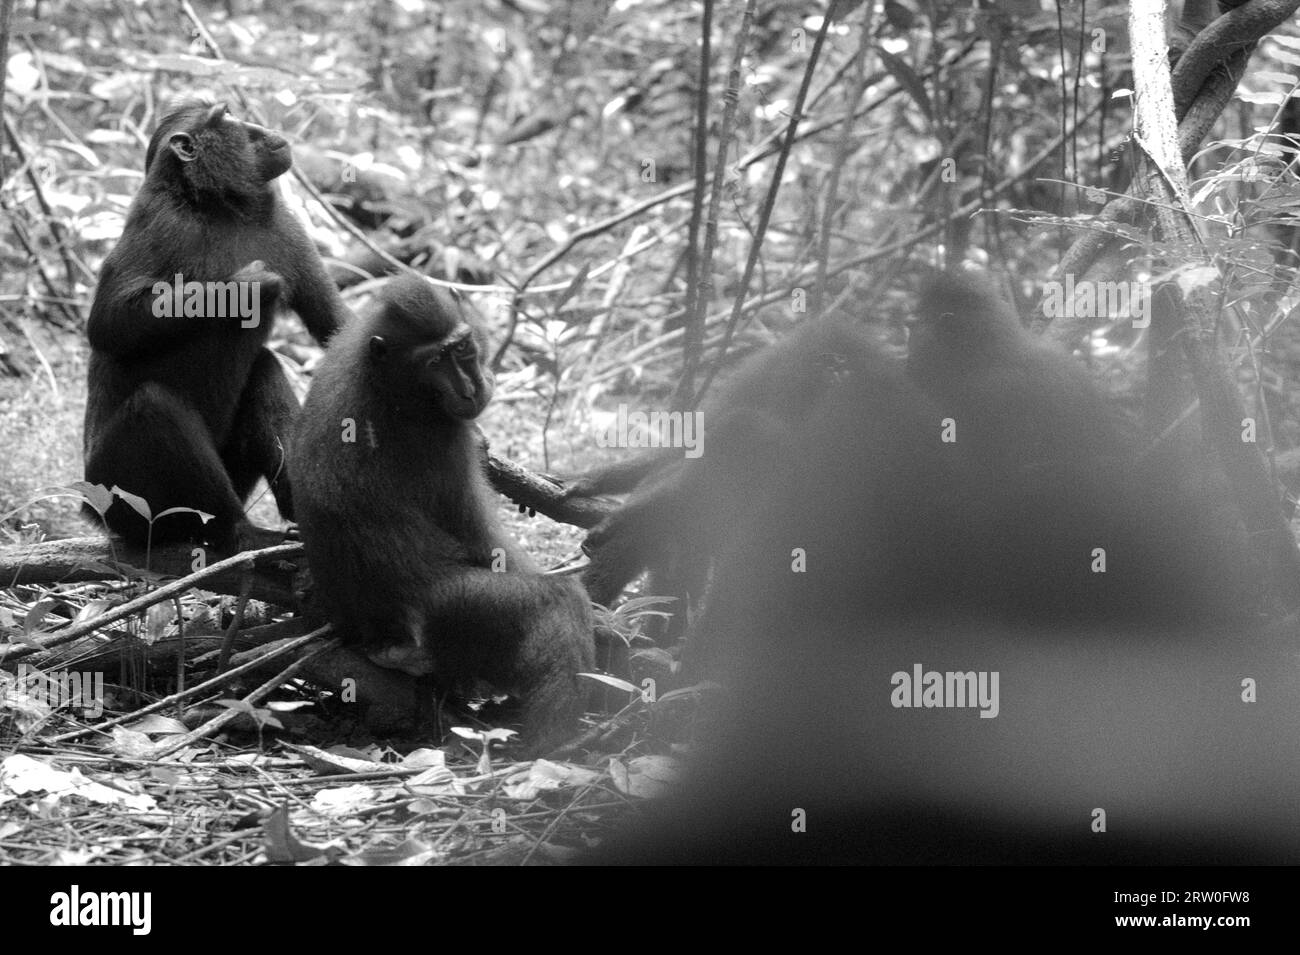 A group of Sulawesi black-crested macaque (Macaca nigra) is photographed as they are having social activity in Tangkoko Nature Reserve, North Sulawesi, Indonesia.  Climate change and disease are emerging threats to primates, while crested macaque belongs to the 10% of primate species that are highly vulnerable to droughts, according to primatologists. A recent report revealed that the temperature is indeed increasing in Tangkoko forest, and the overall fruit abundance decreased. Macaca nigra is considered a key species in their habitat, an important 'umbrella species' for... Stock Photo